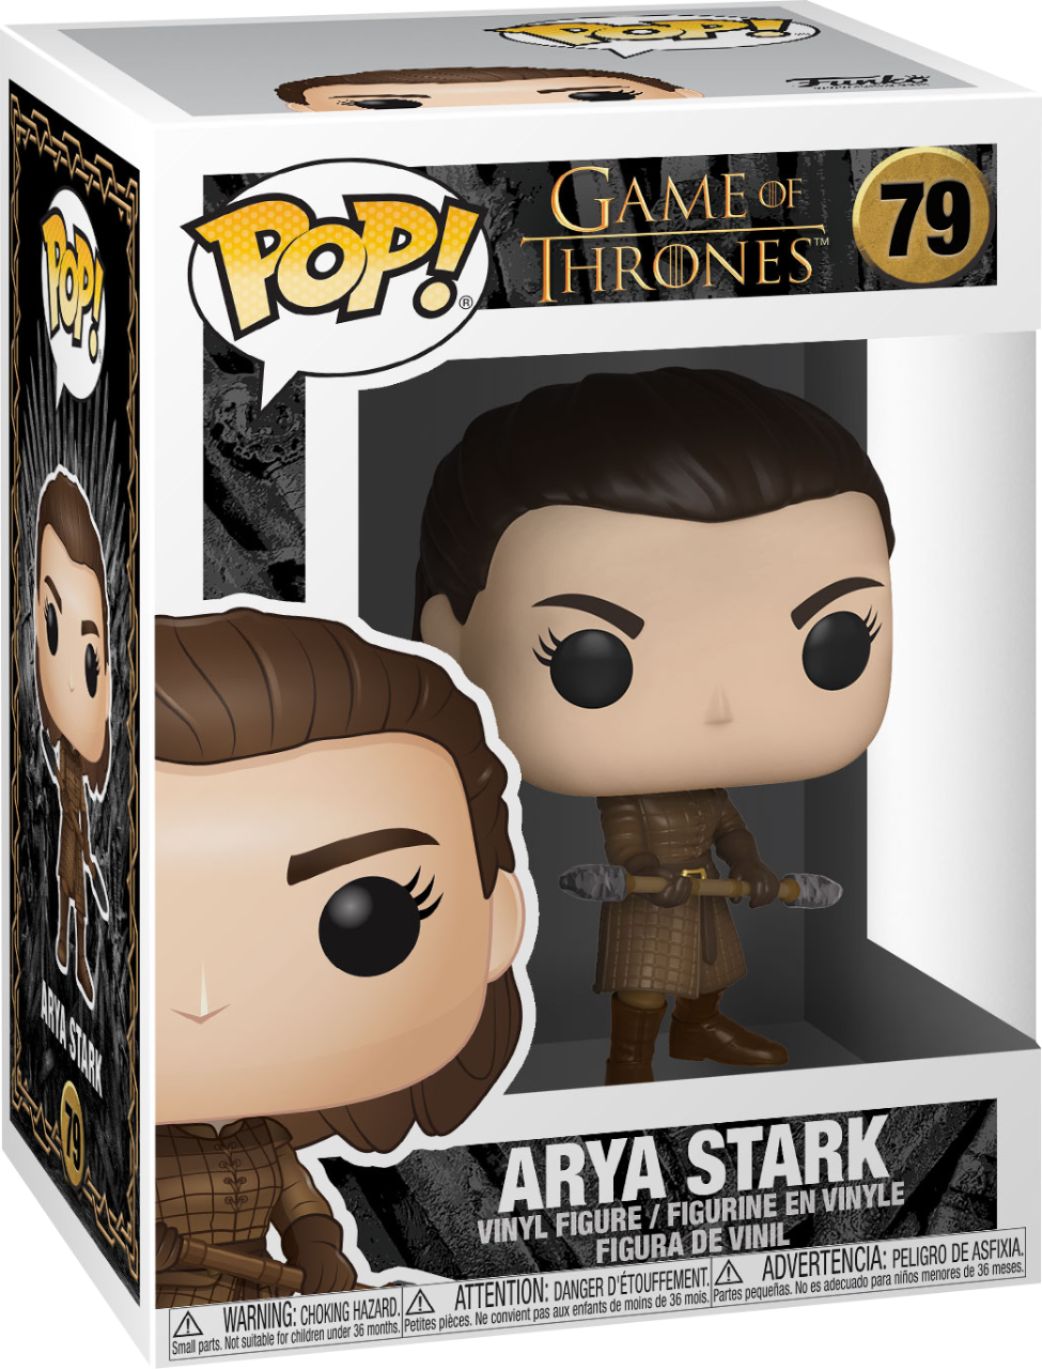 Funko Pop Game Of Thrones 8 Arya Stark #26 Action Figure Box Toy Limited Edition 